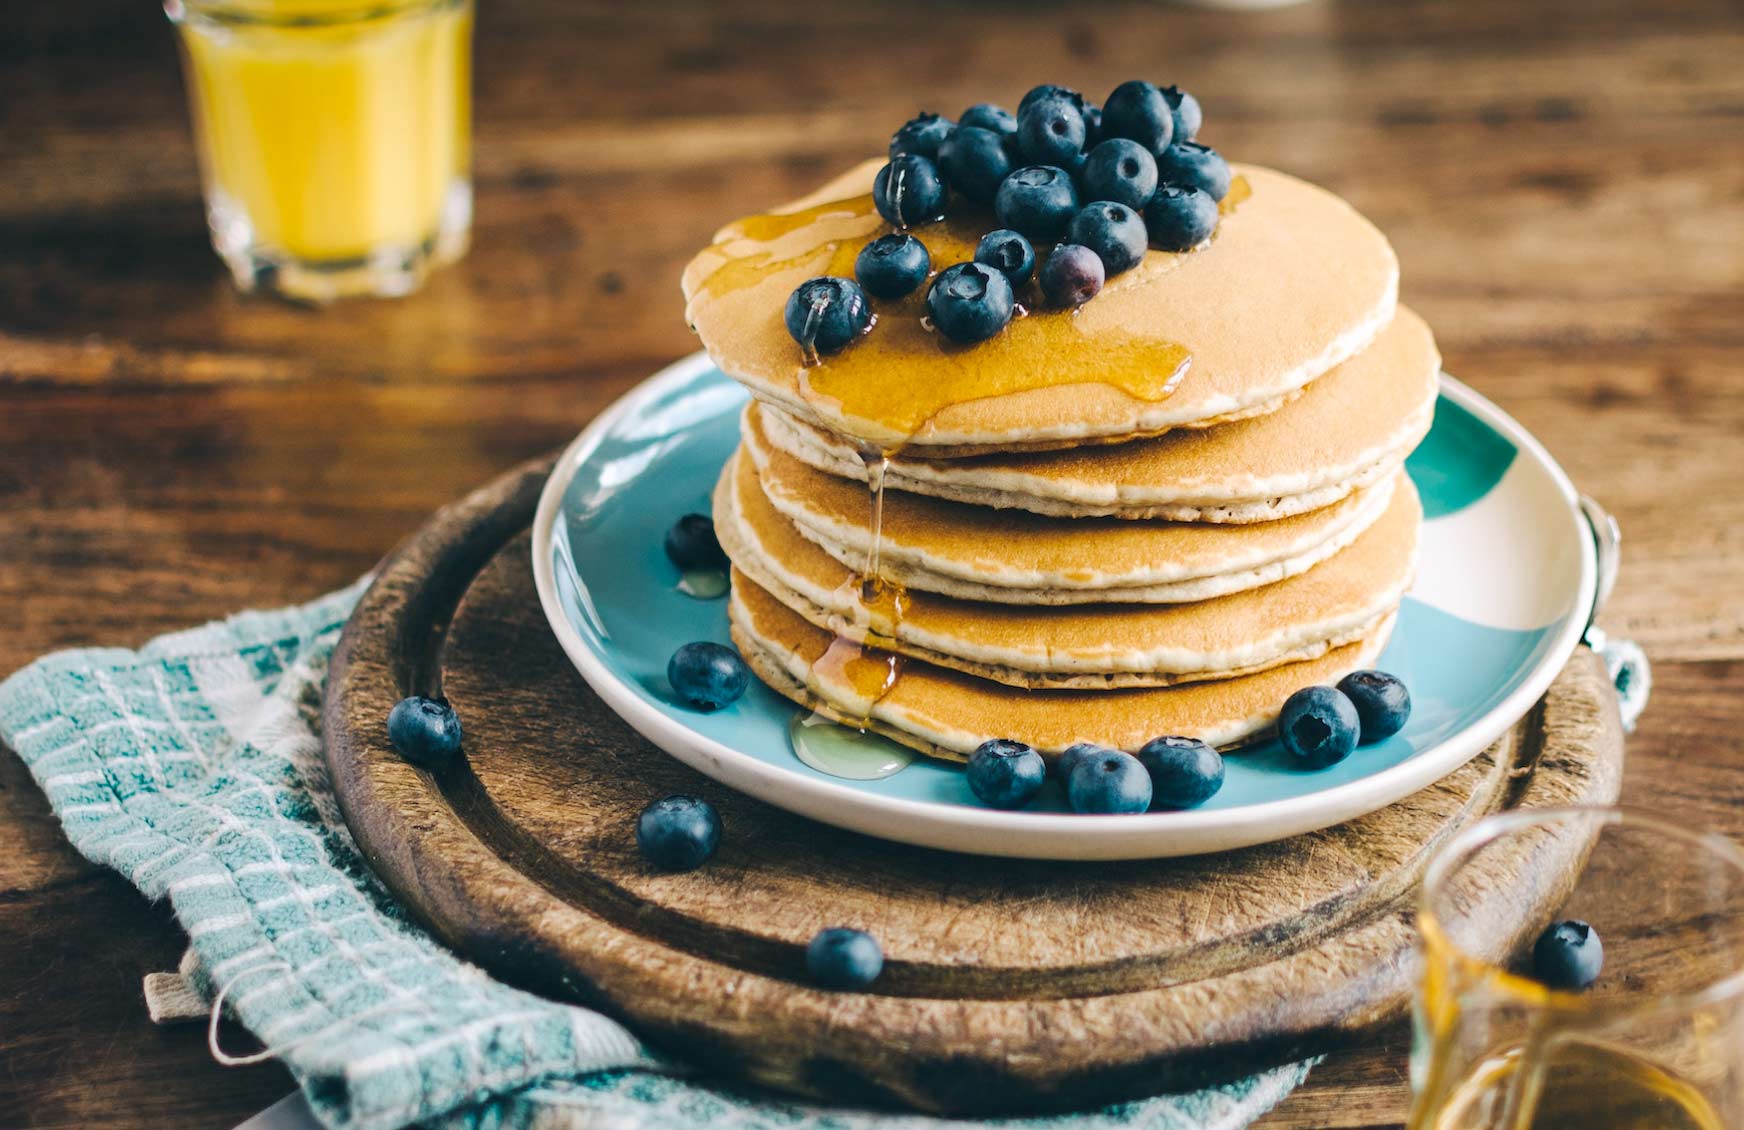 Do You Actually Prefer American or French Desserts? Blueberry Pancakes